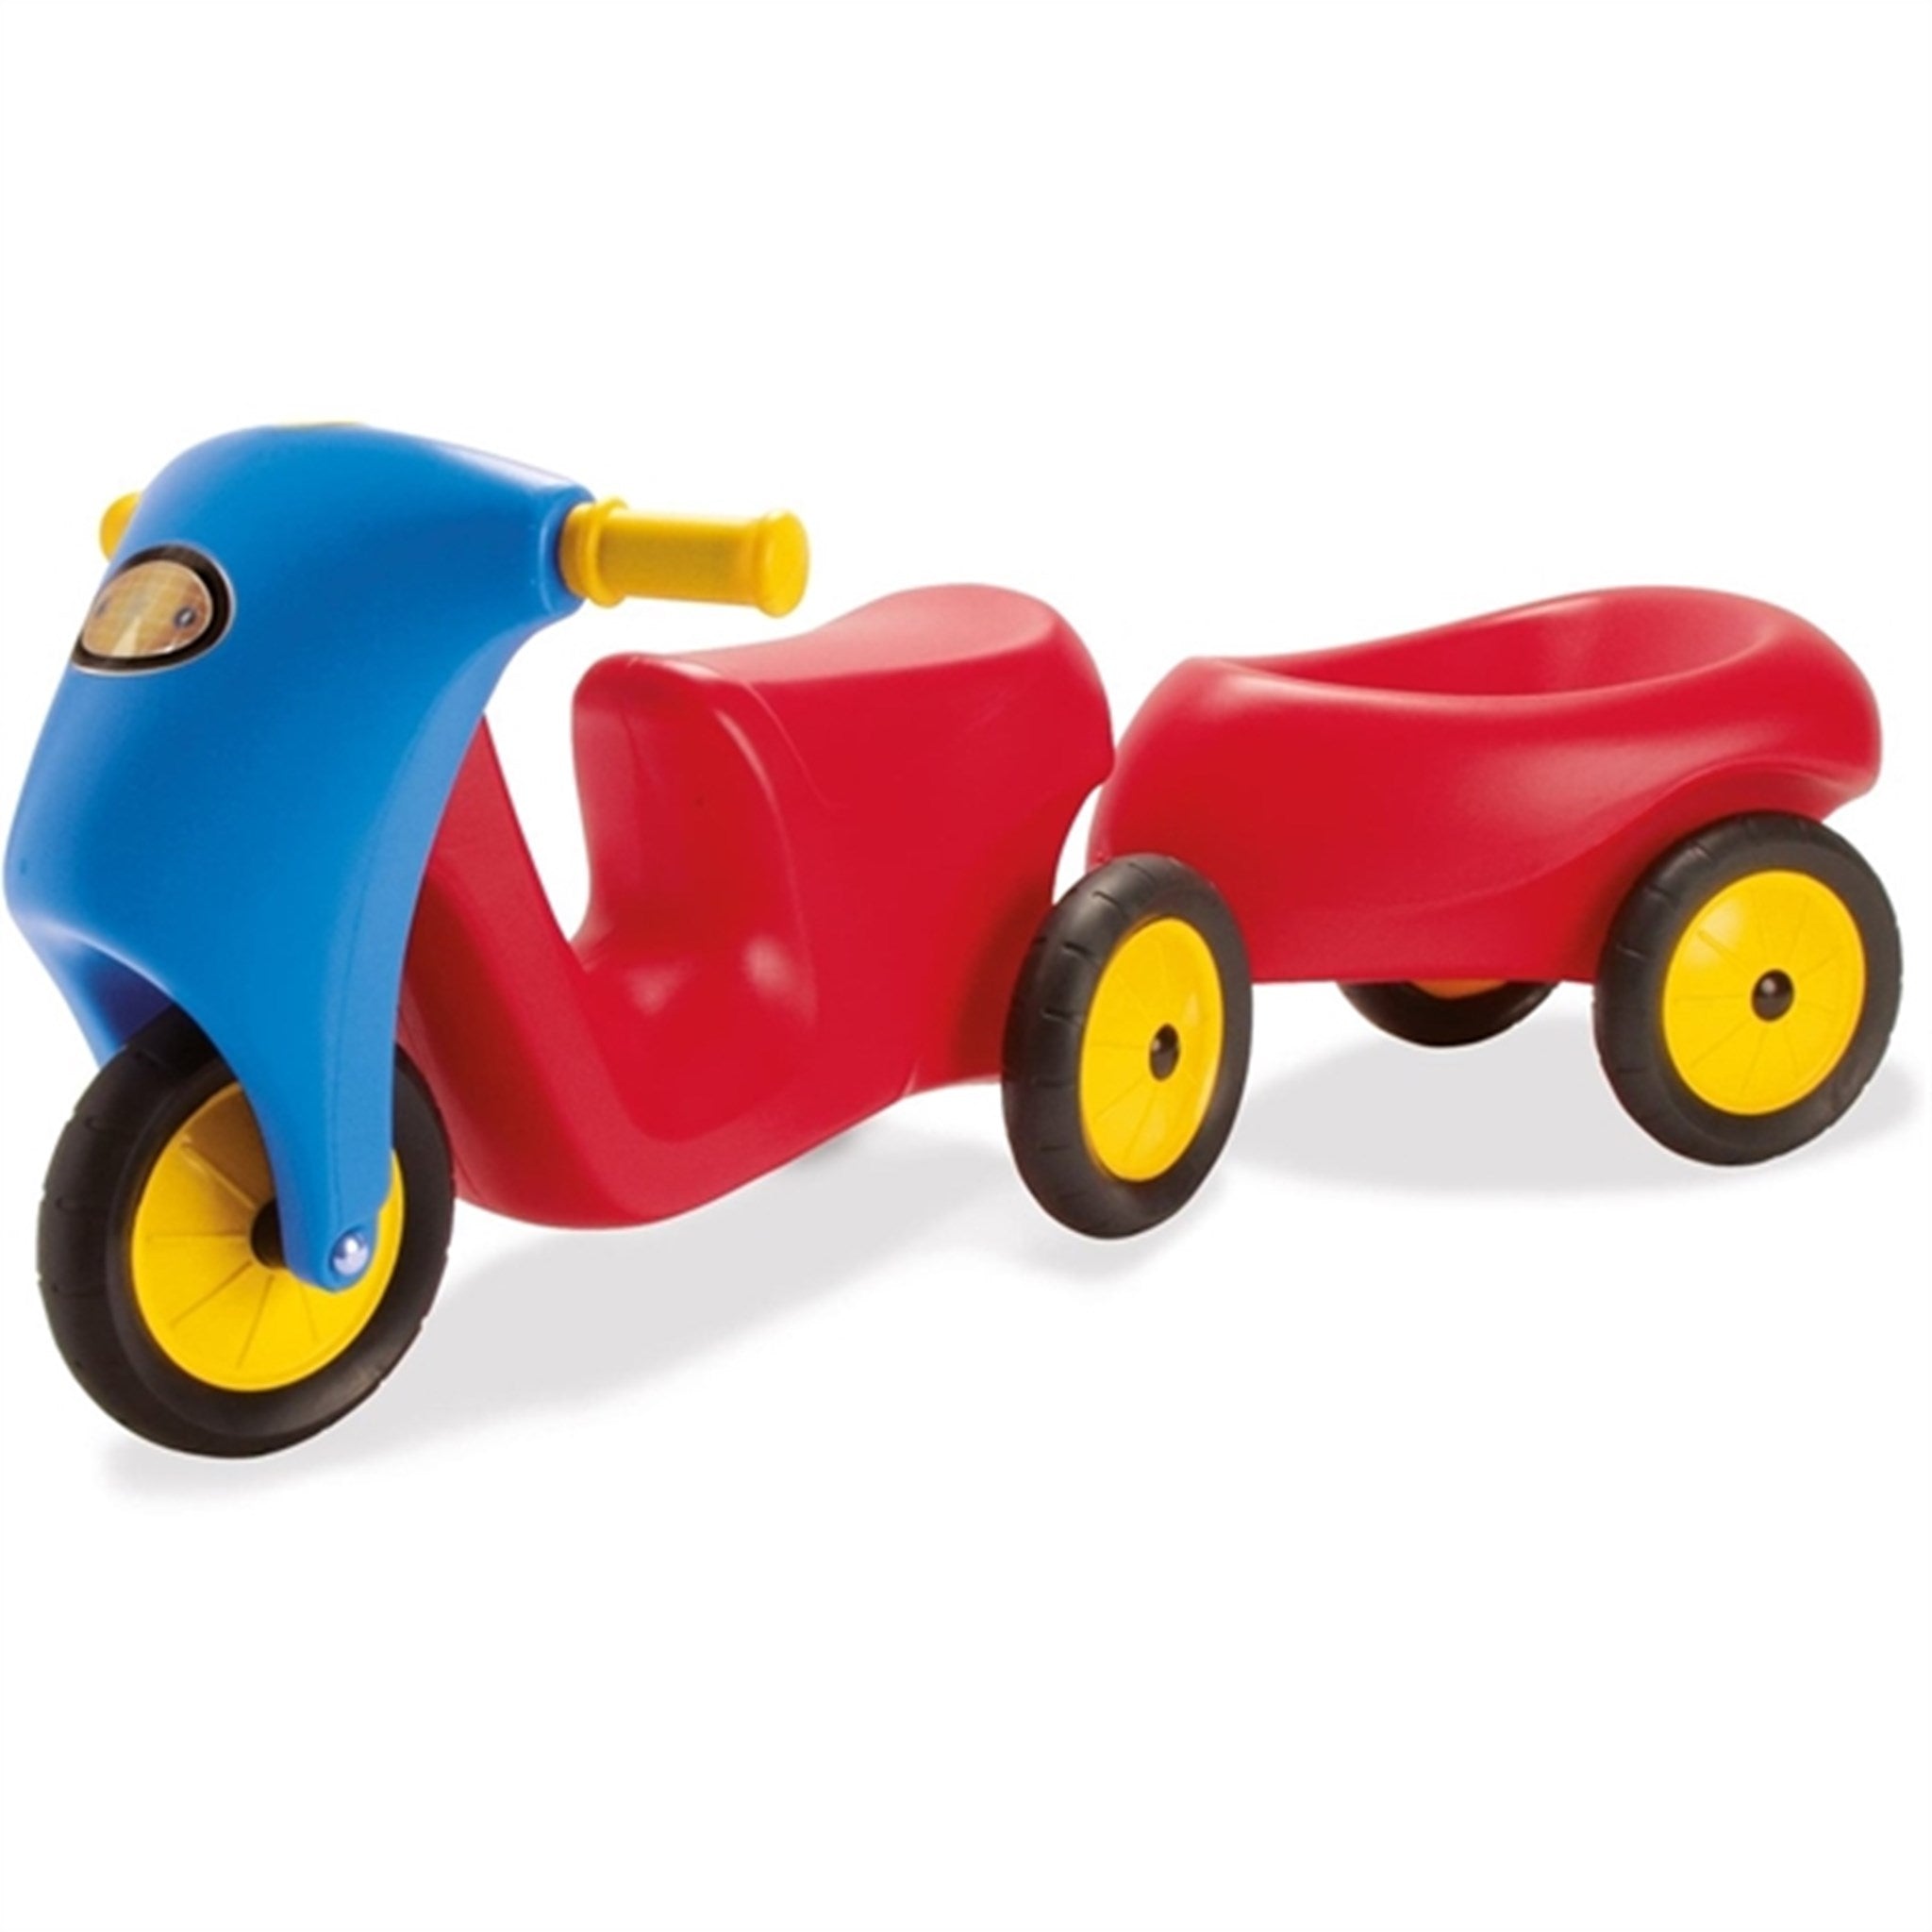 Dantoy Dt Trailer With Rubber Wheels 3